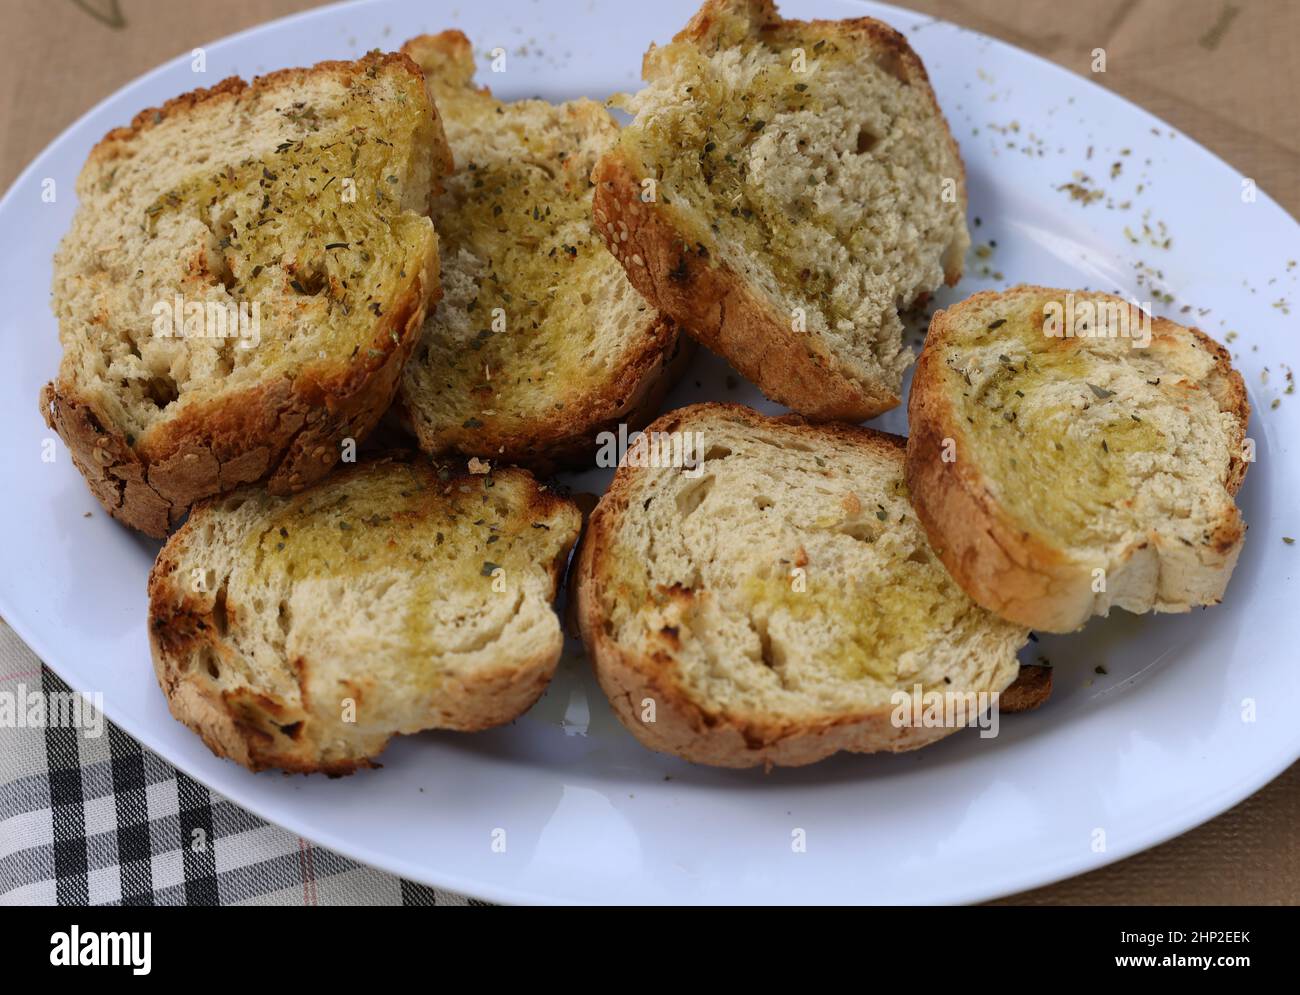 baguette slices with garlic and olive oil on a white plate Stock Photo